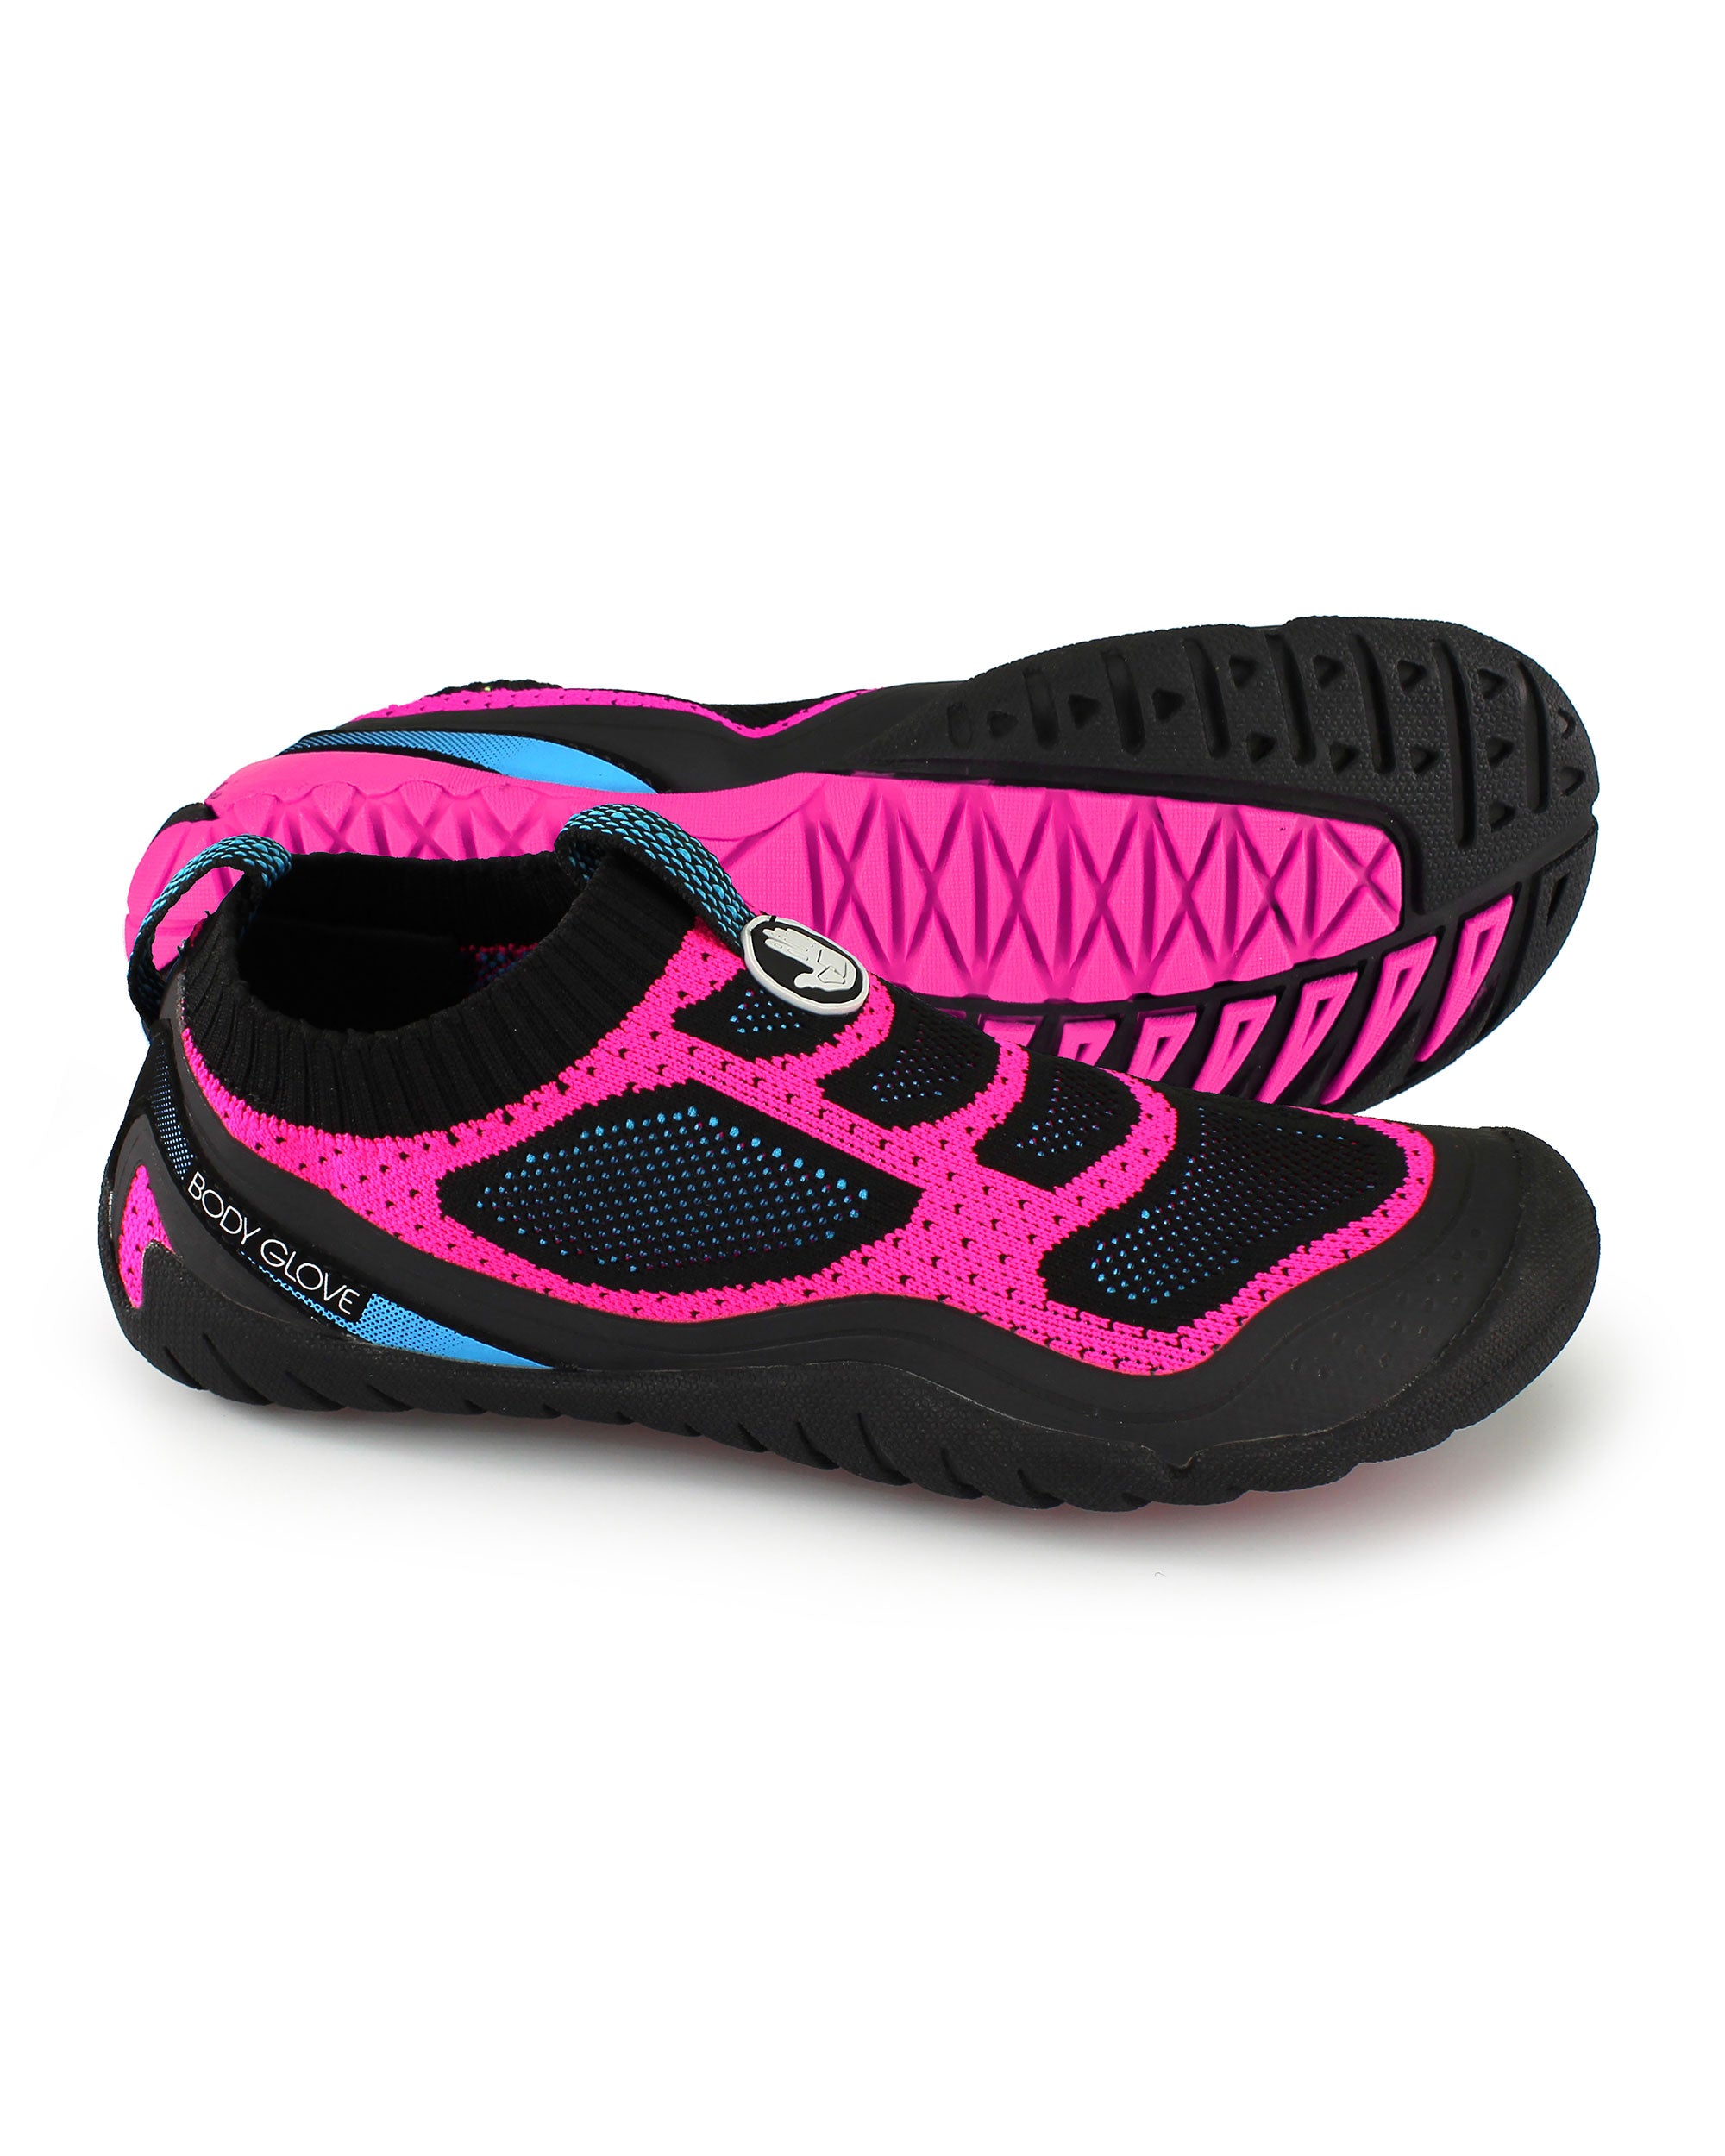 neon pink womens shoes